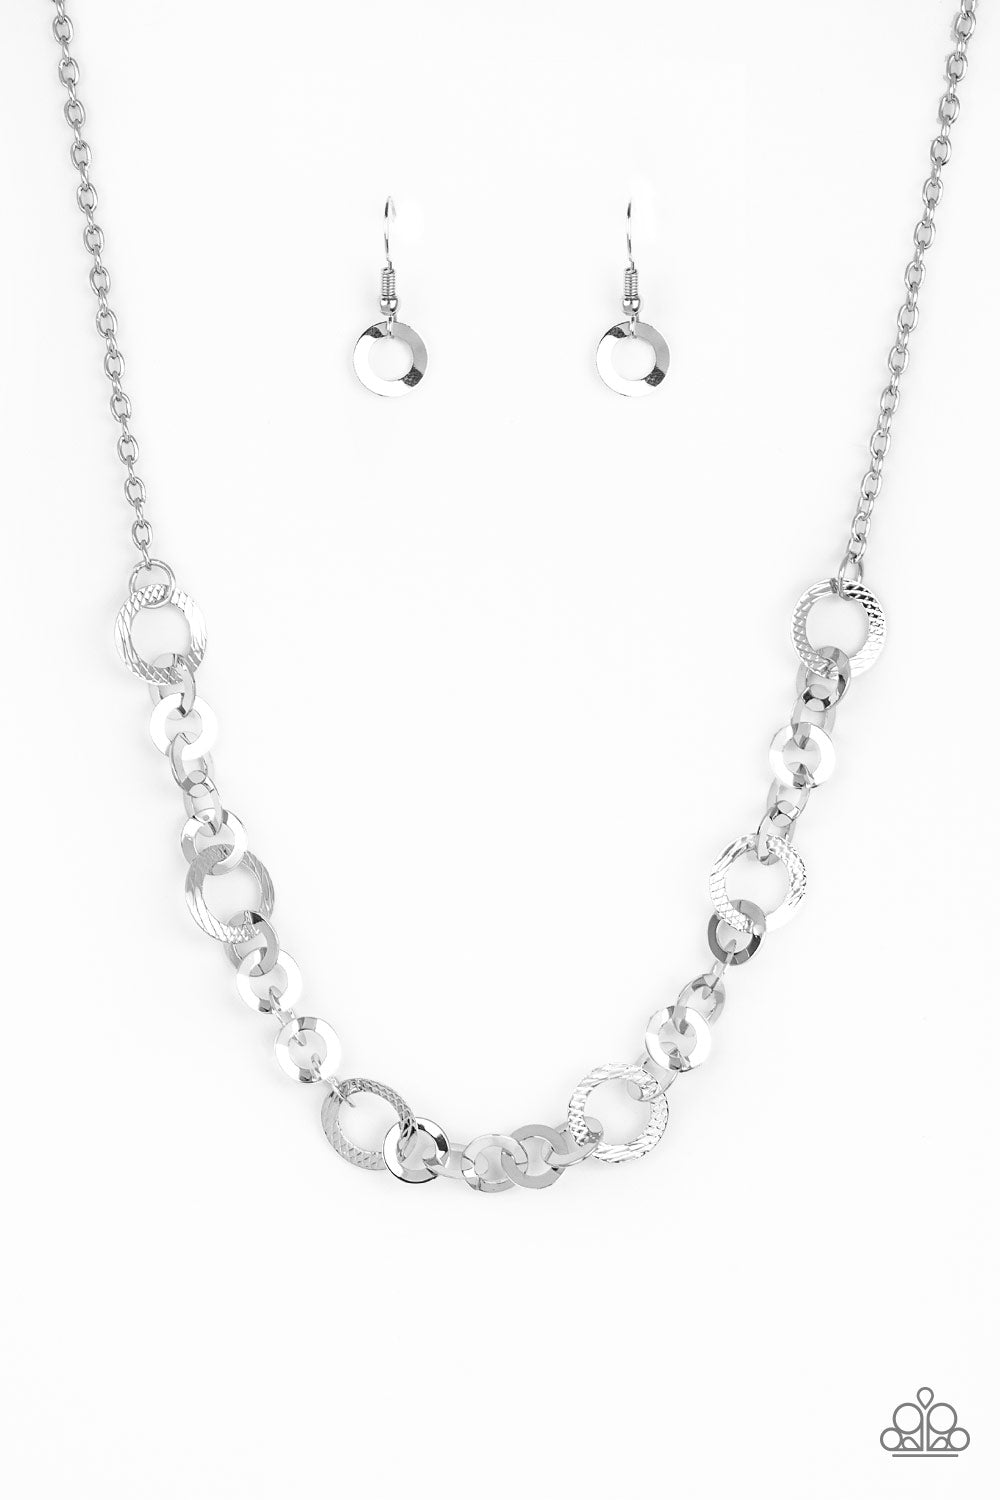 Paparazzi necklace - Move It On Over - Silver